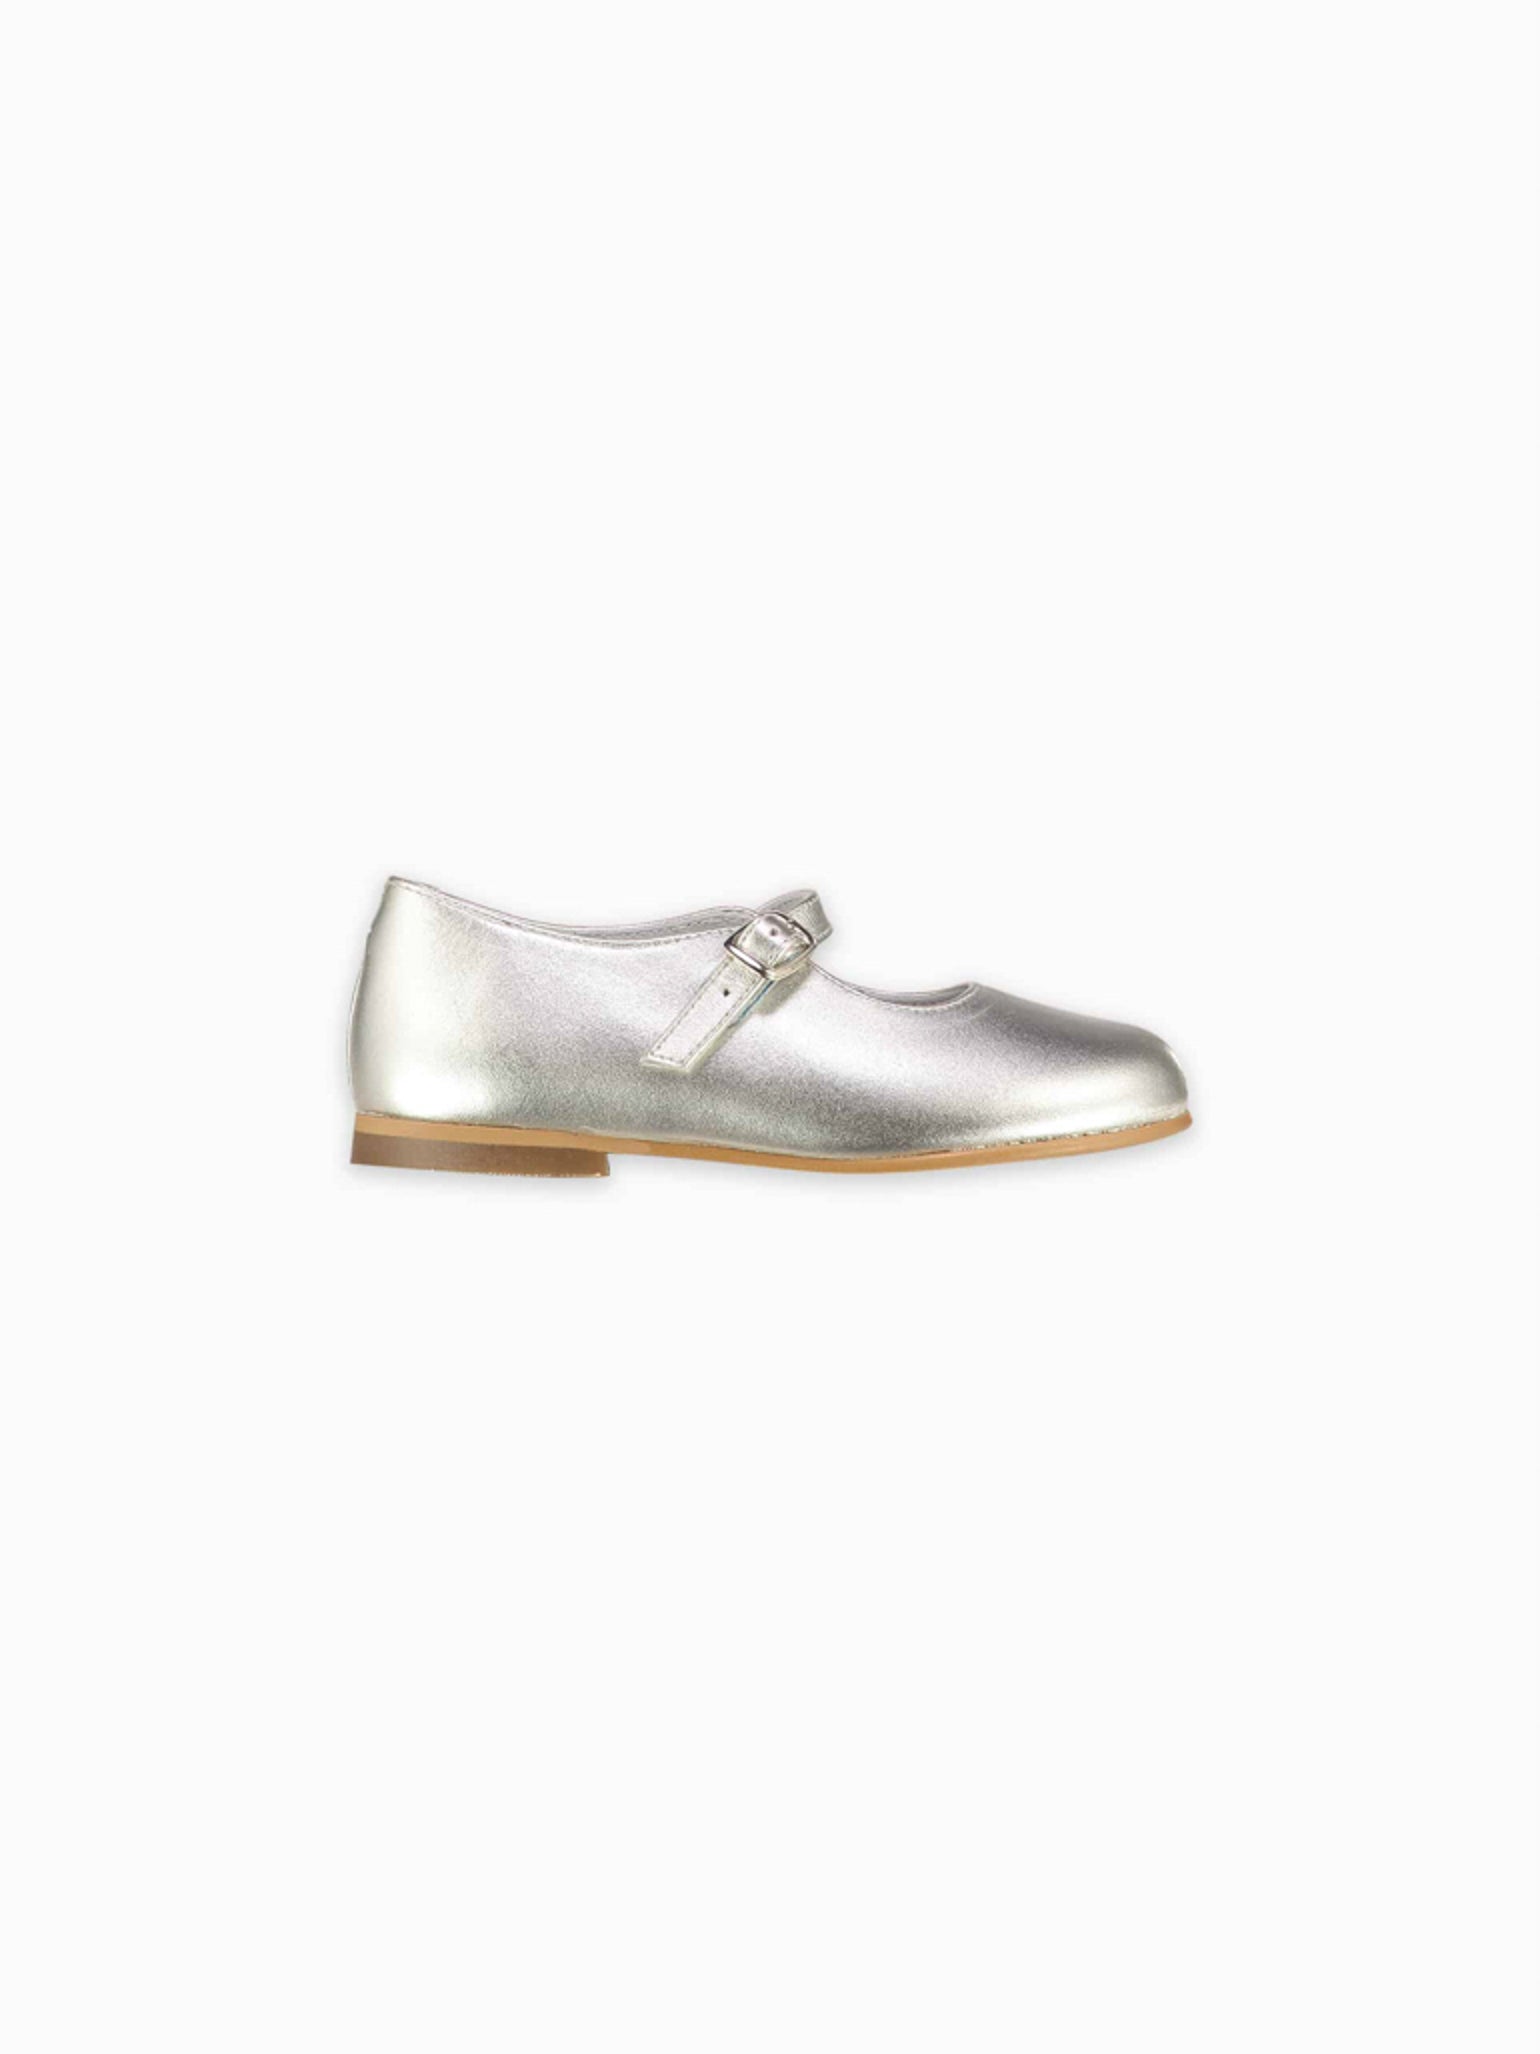 Silver Leather Girl Mary Jane Shoes